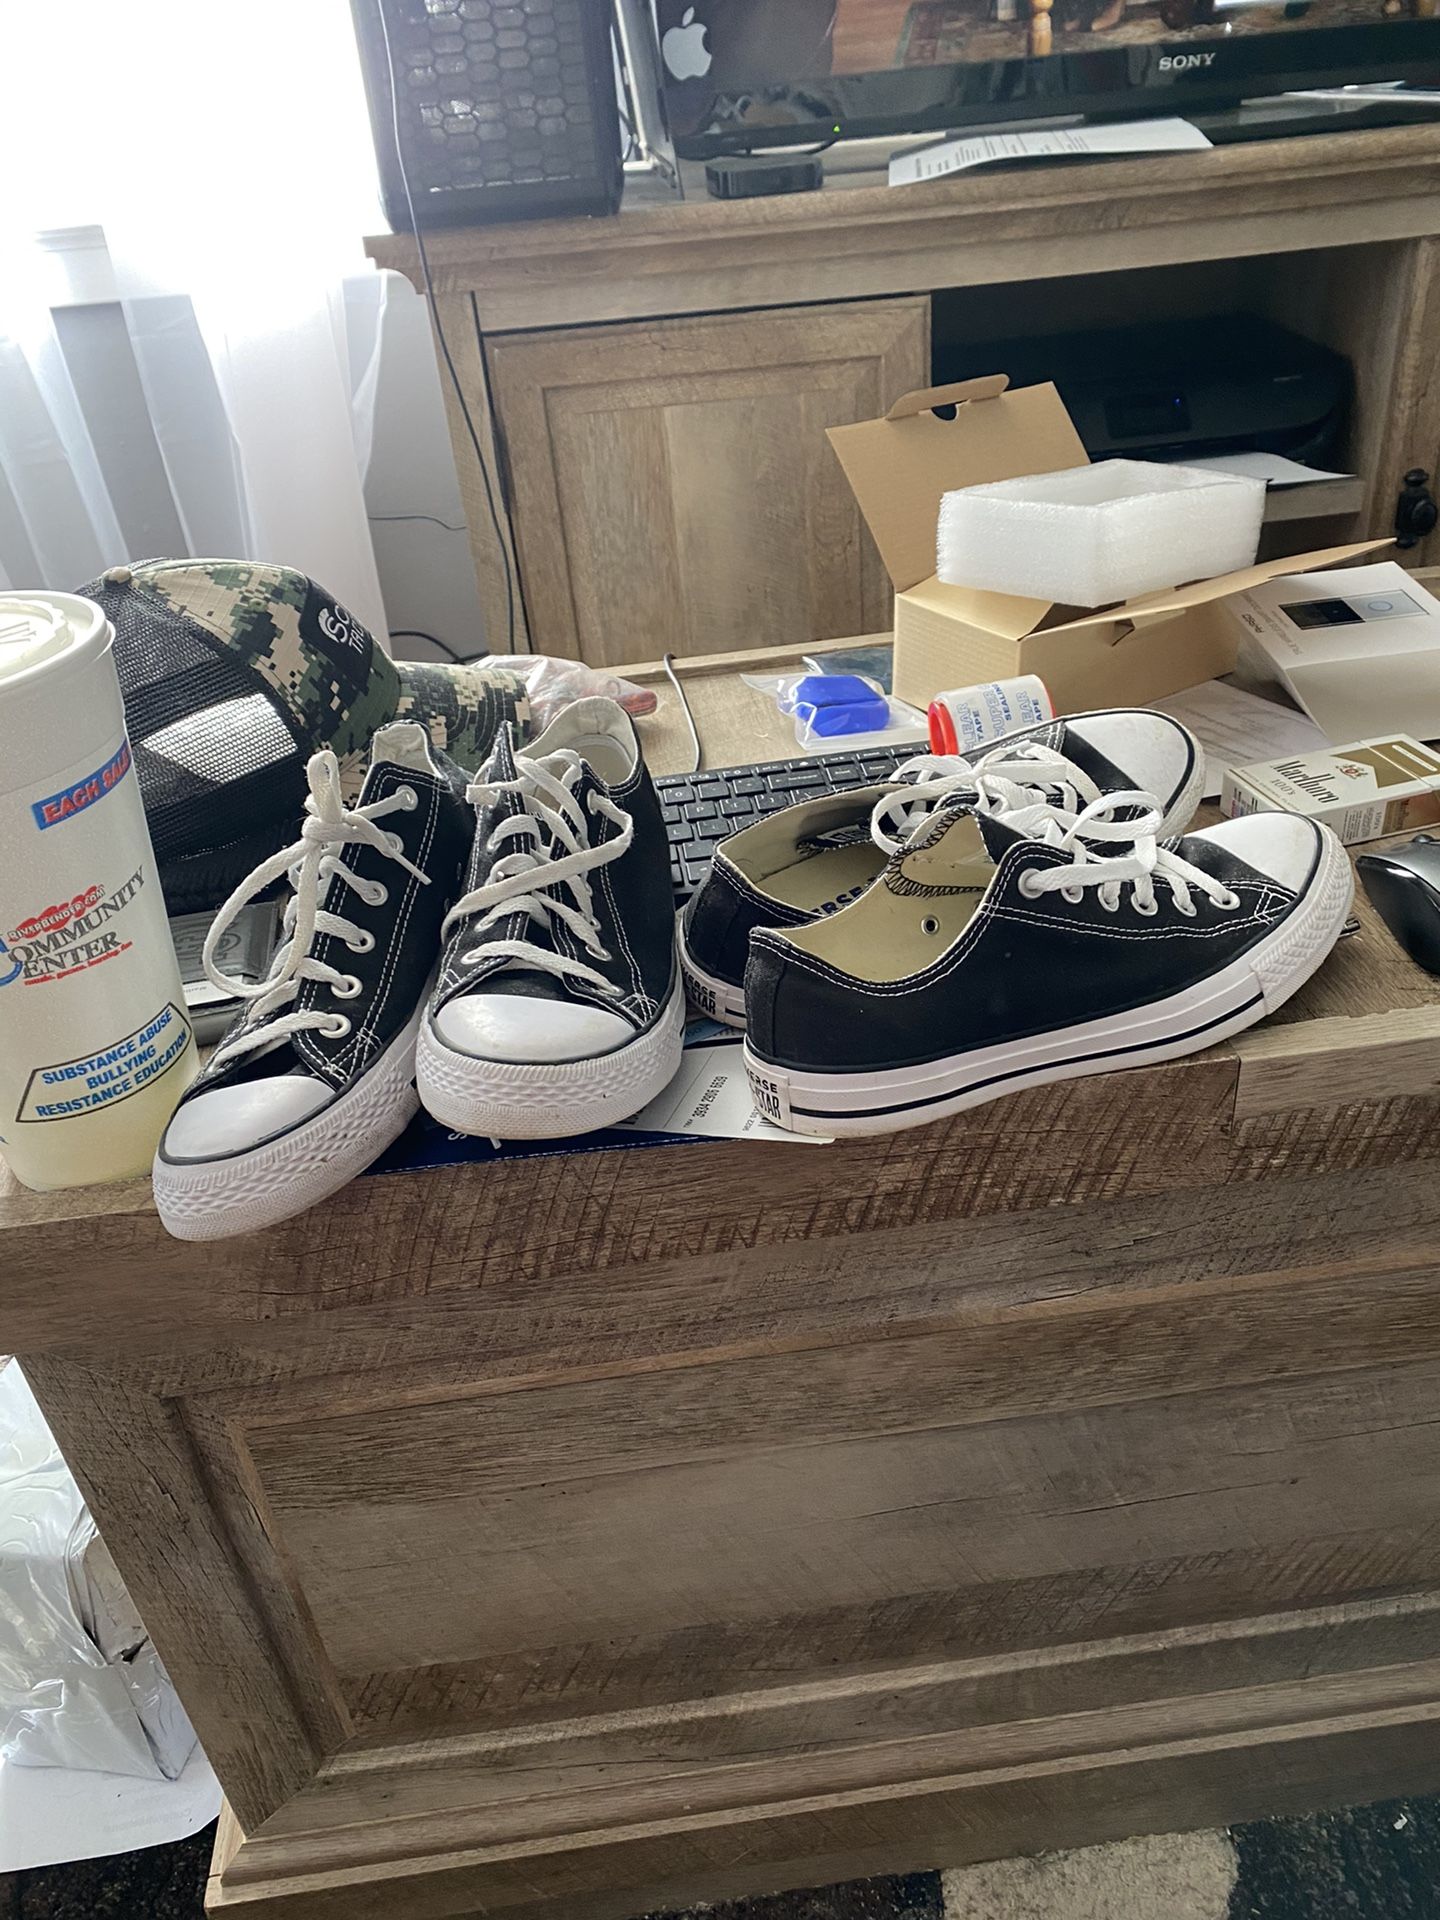 Converse All stars from kohl’s